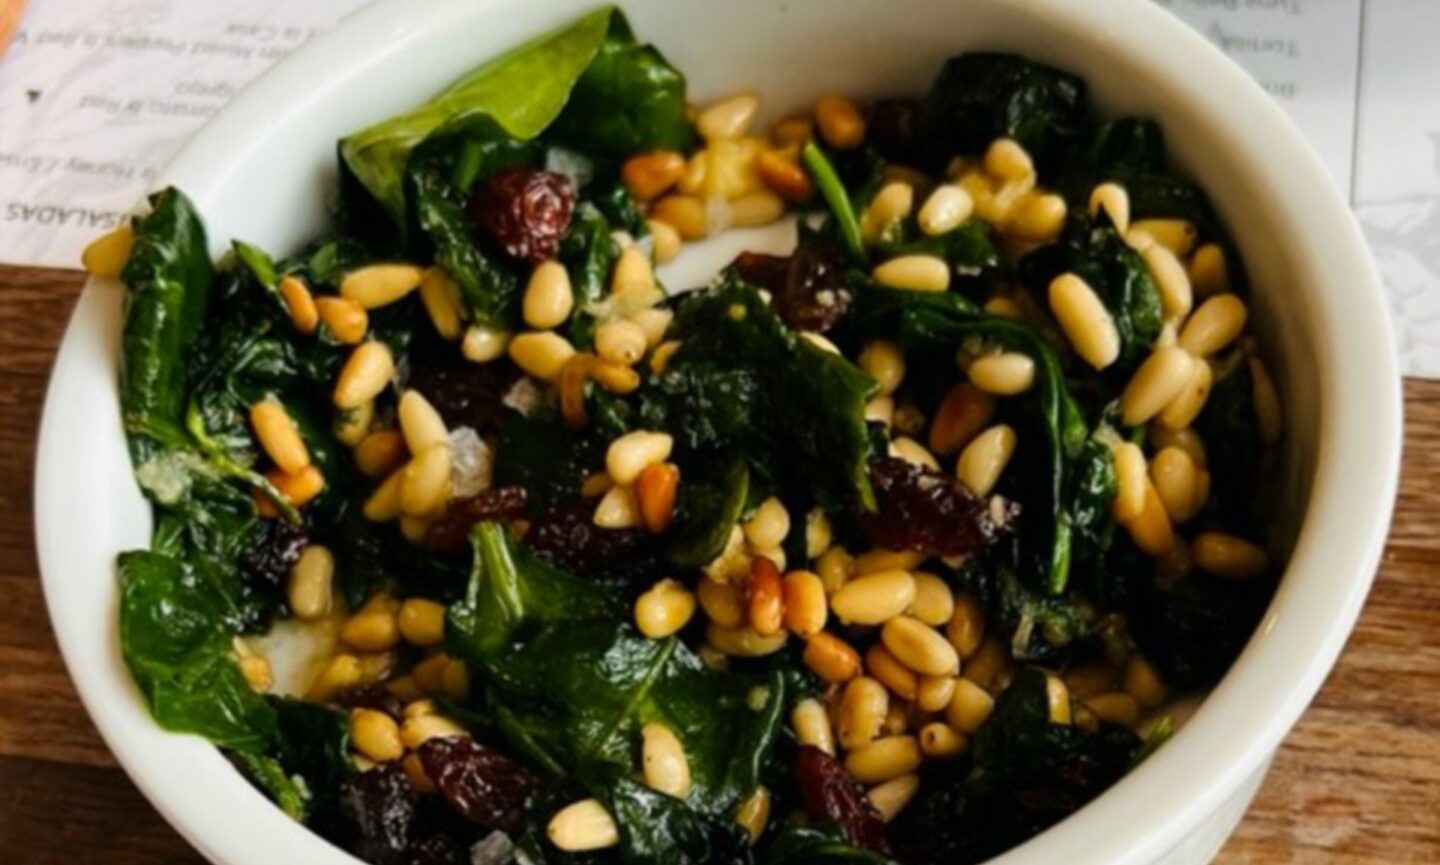 The catalan spinach with pine nuts and golden raisins.